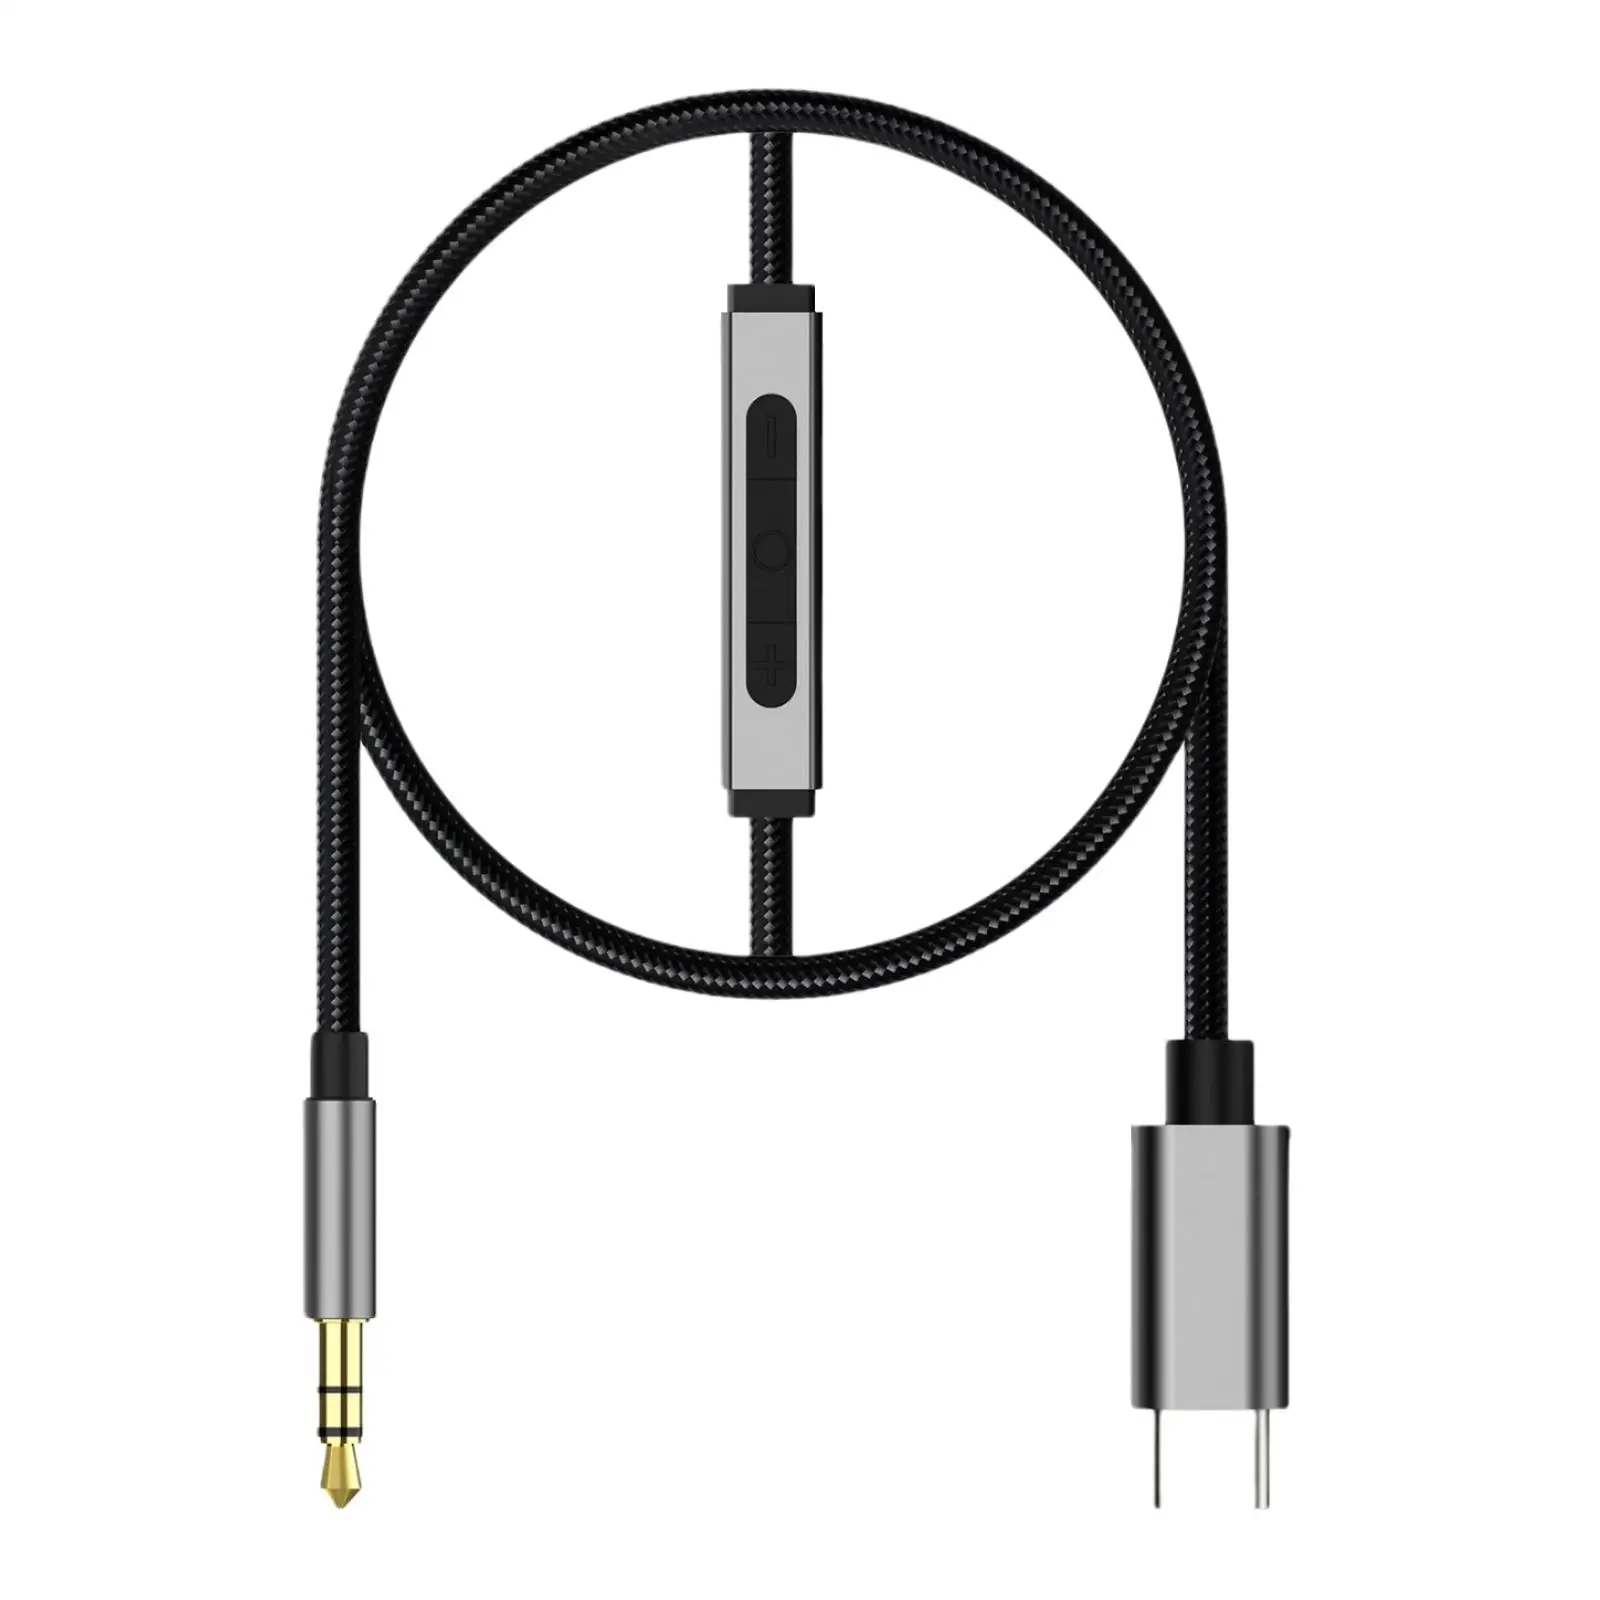 USB C to 3.5mm Audio AUX Cable Dongle Cable Cord Extension Stereo DAC Chip Type C Adapter to 3.5mm Headphone Cable for PC Laptop